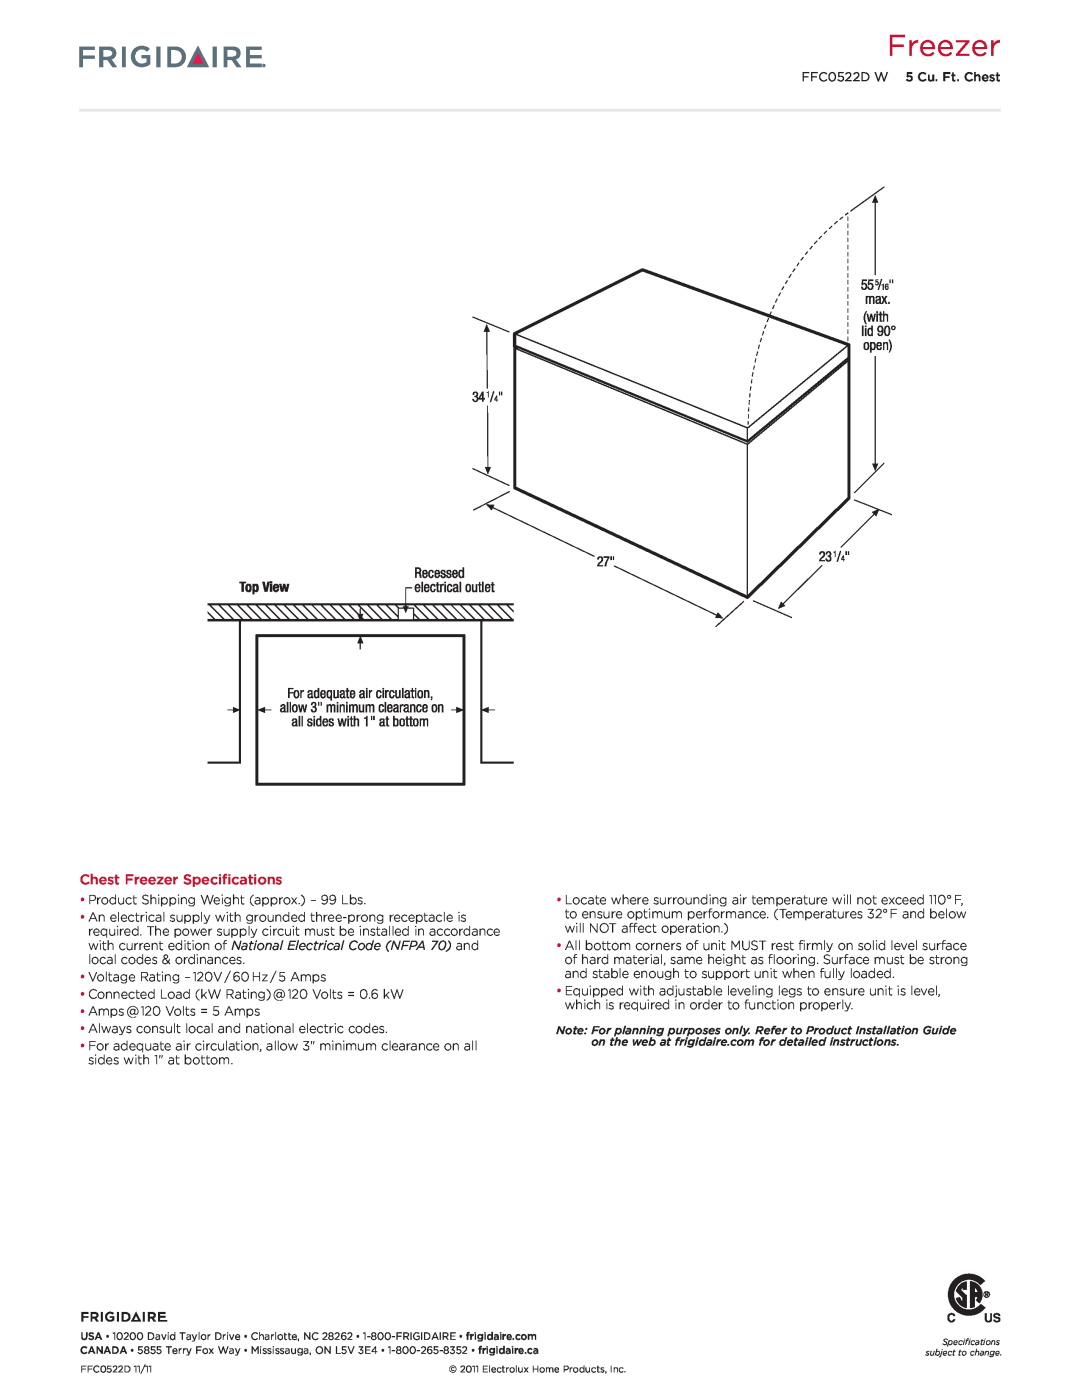 Frigidaire FFC0522D W dimensions Chest Freezer Specifications 